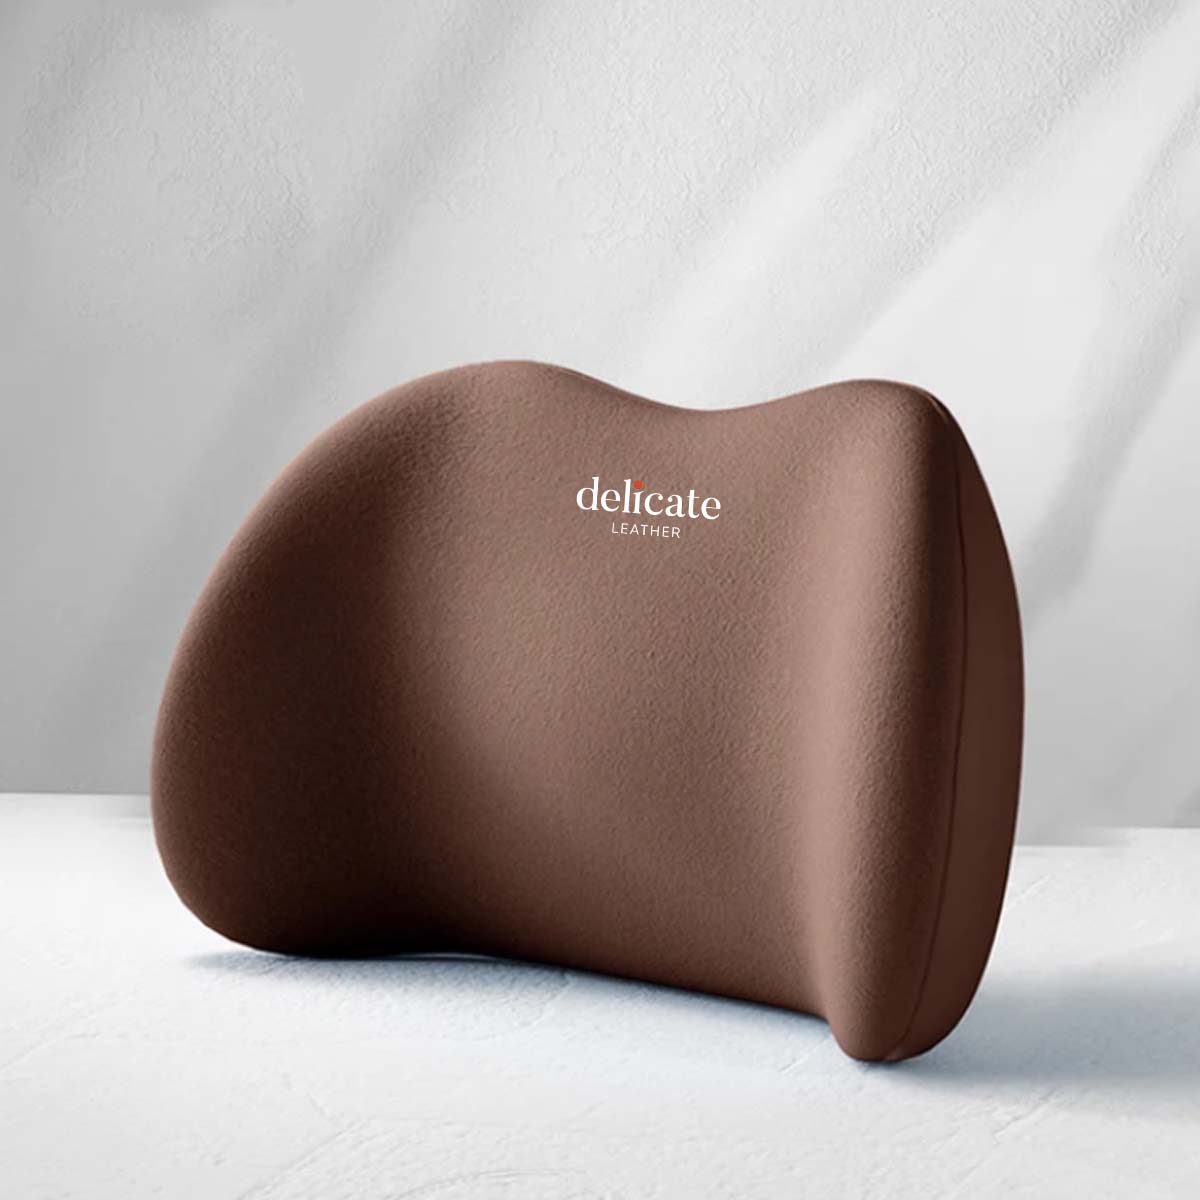 Delicate Leather Car Neck Headrest Pillow: Premium Memory Foam Support Cushion for Ultimate Comfort, Breathable Travel Companion, Lumbar Pillow Included - Universal Car Supplies - Delicate Leather